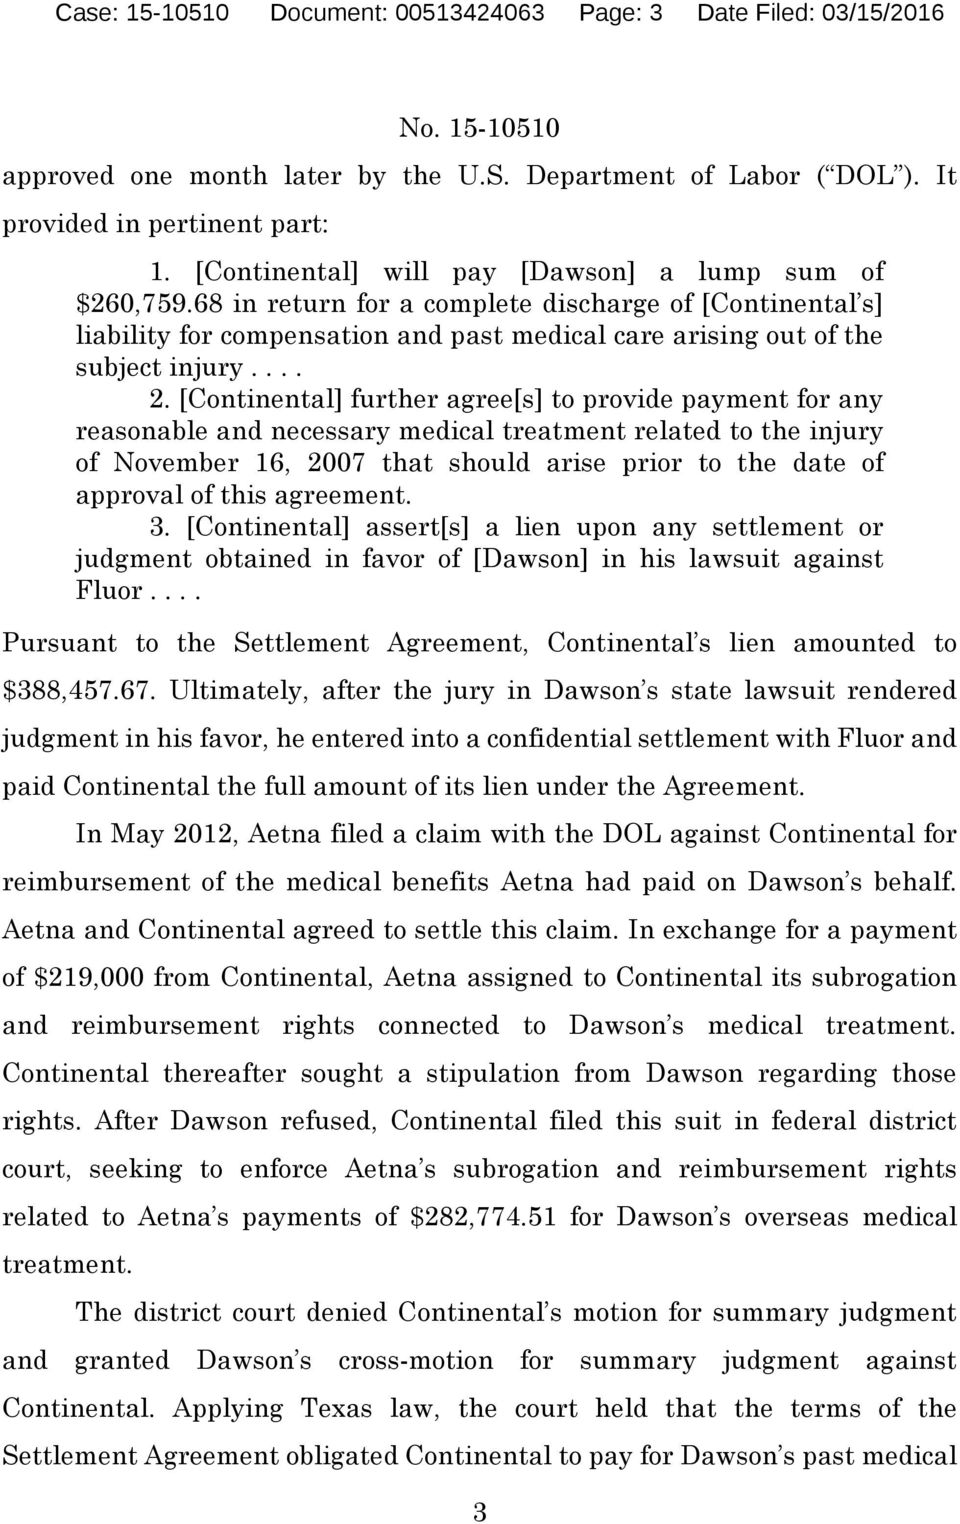 [Continental] further agree[s] to provide payment for any reasonable and necessary medical treatment related to the injury of November 16, 2007 that should arise prior to the date of approval of this